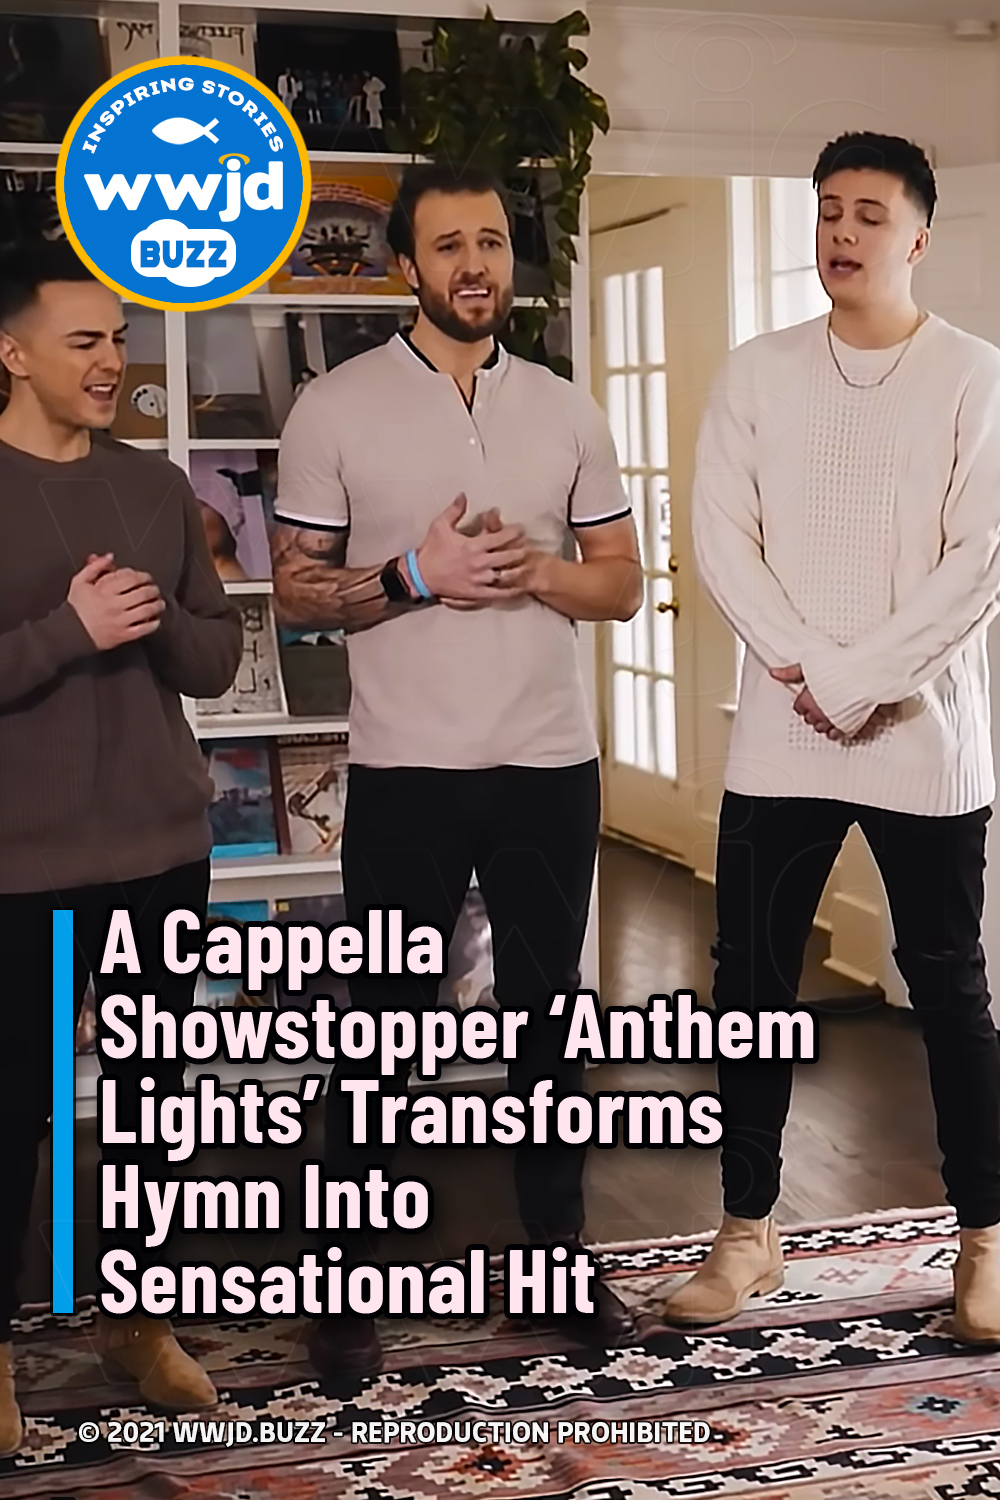 A Cappella Showstopper ‘Anthem Lights’ Transforms Hymn Into Sensational Hit